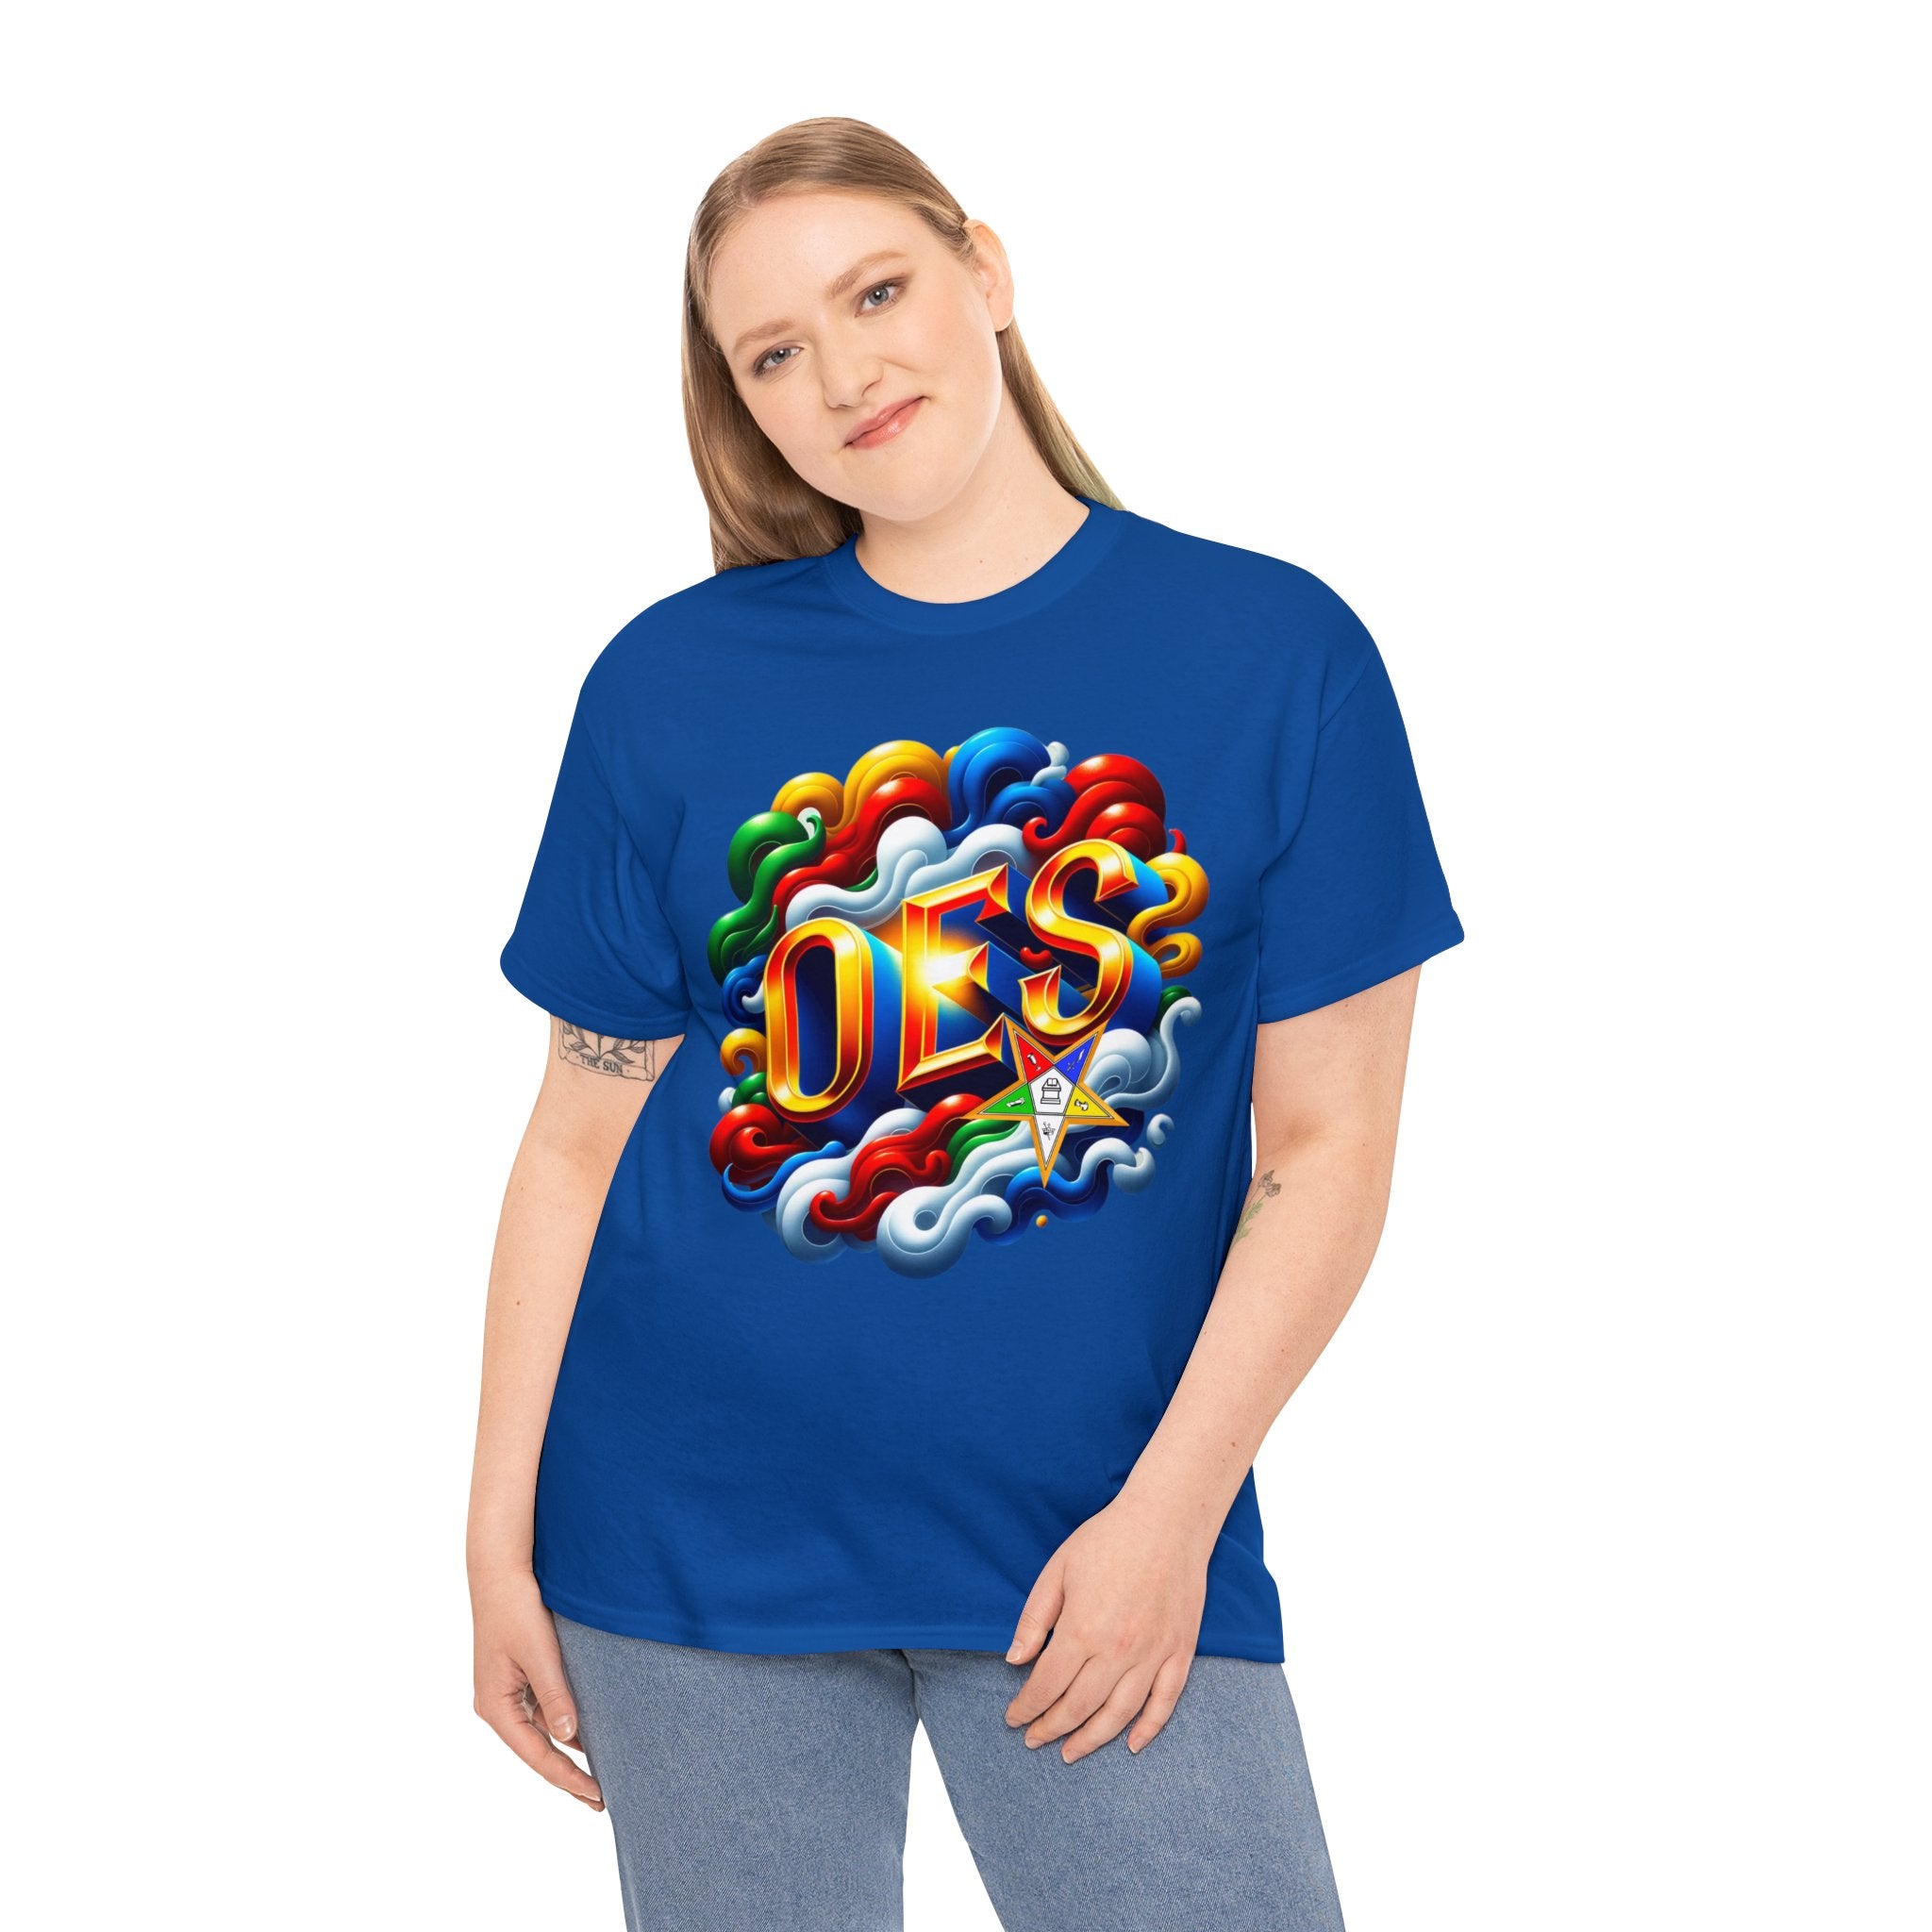 Eastern Star OES ColorBurst T-Shirt